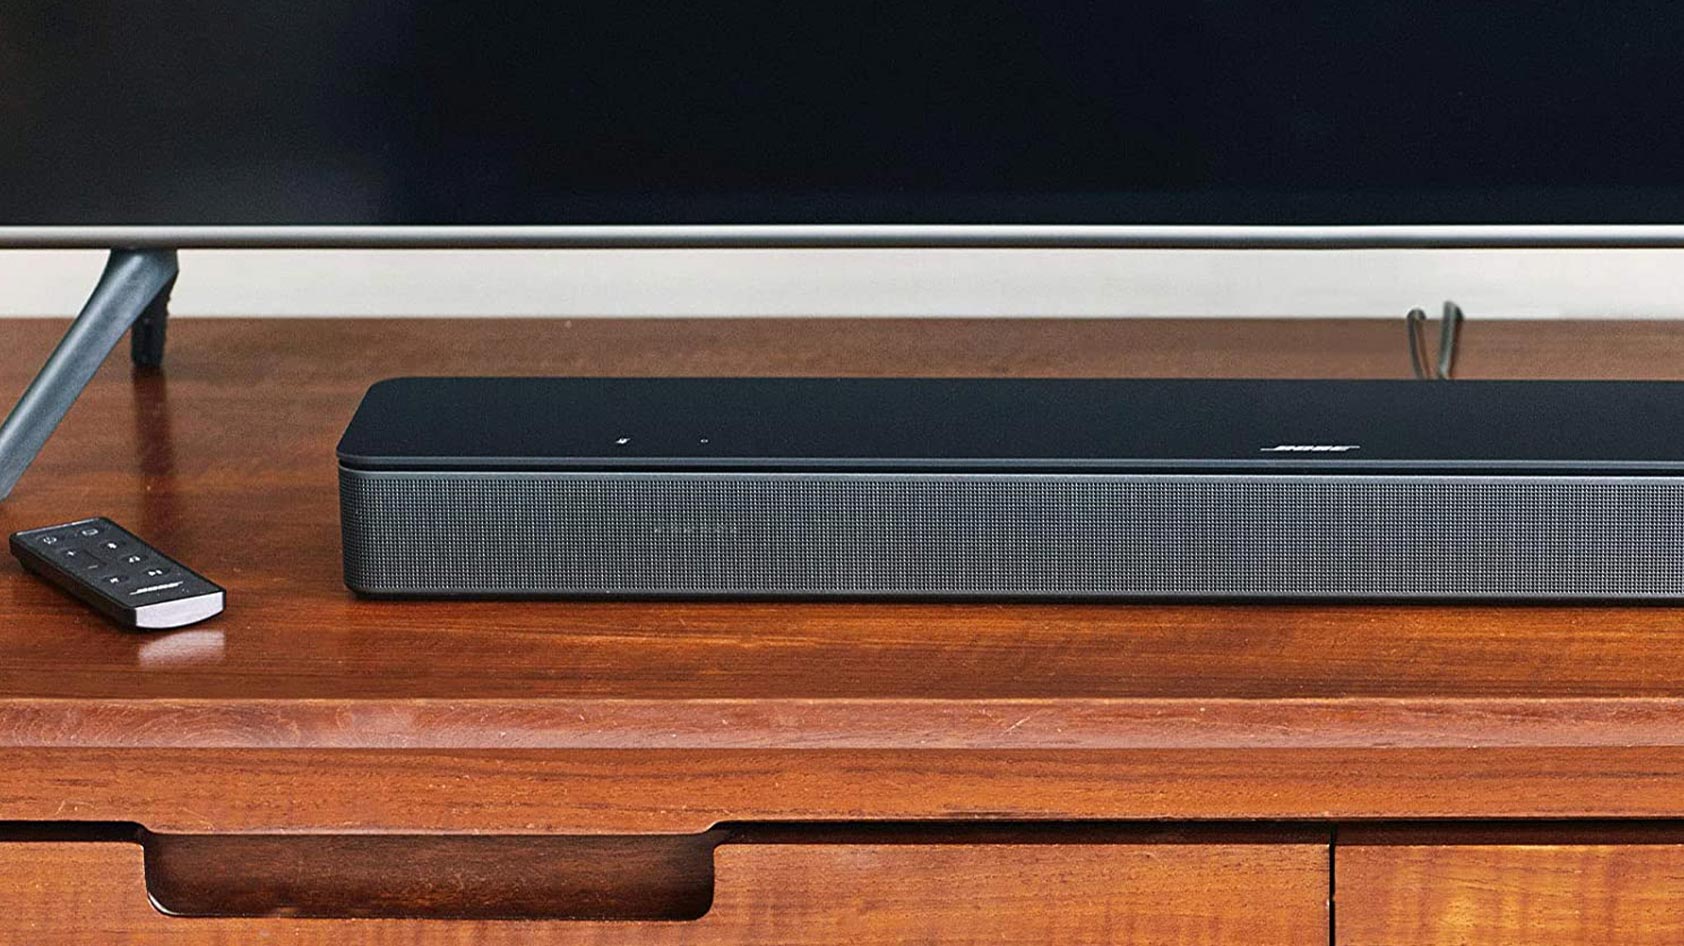 The Bose Smart Soundbar 300 lies on a TV stand next to the remote.